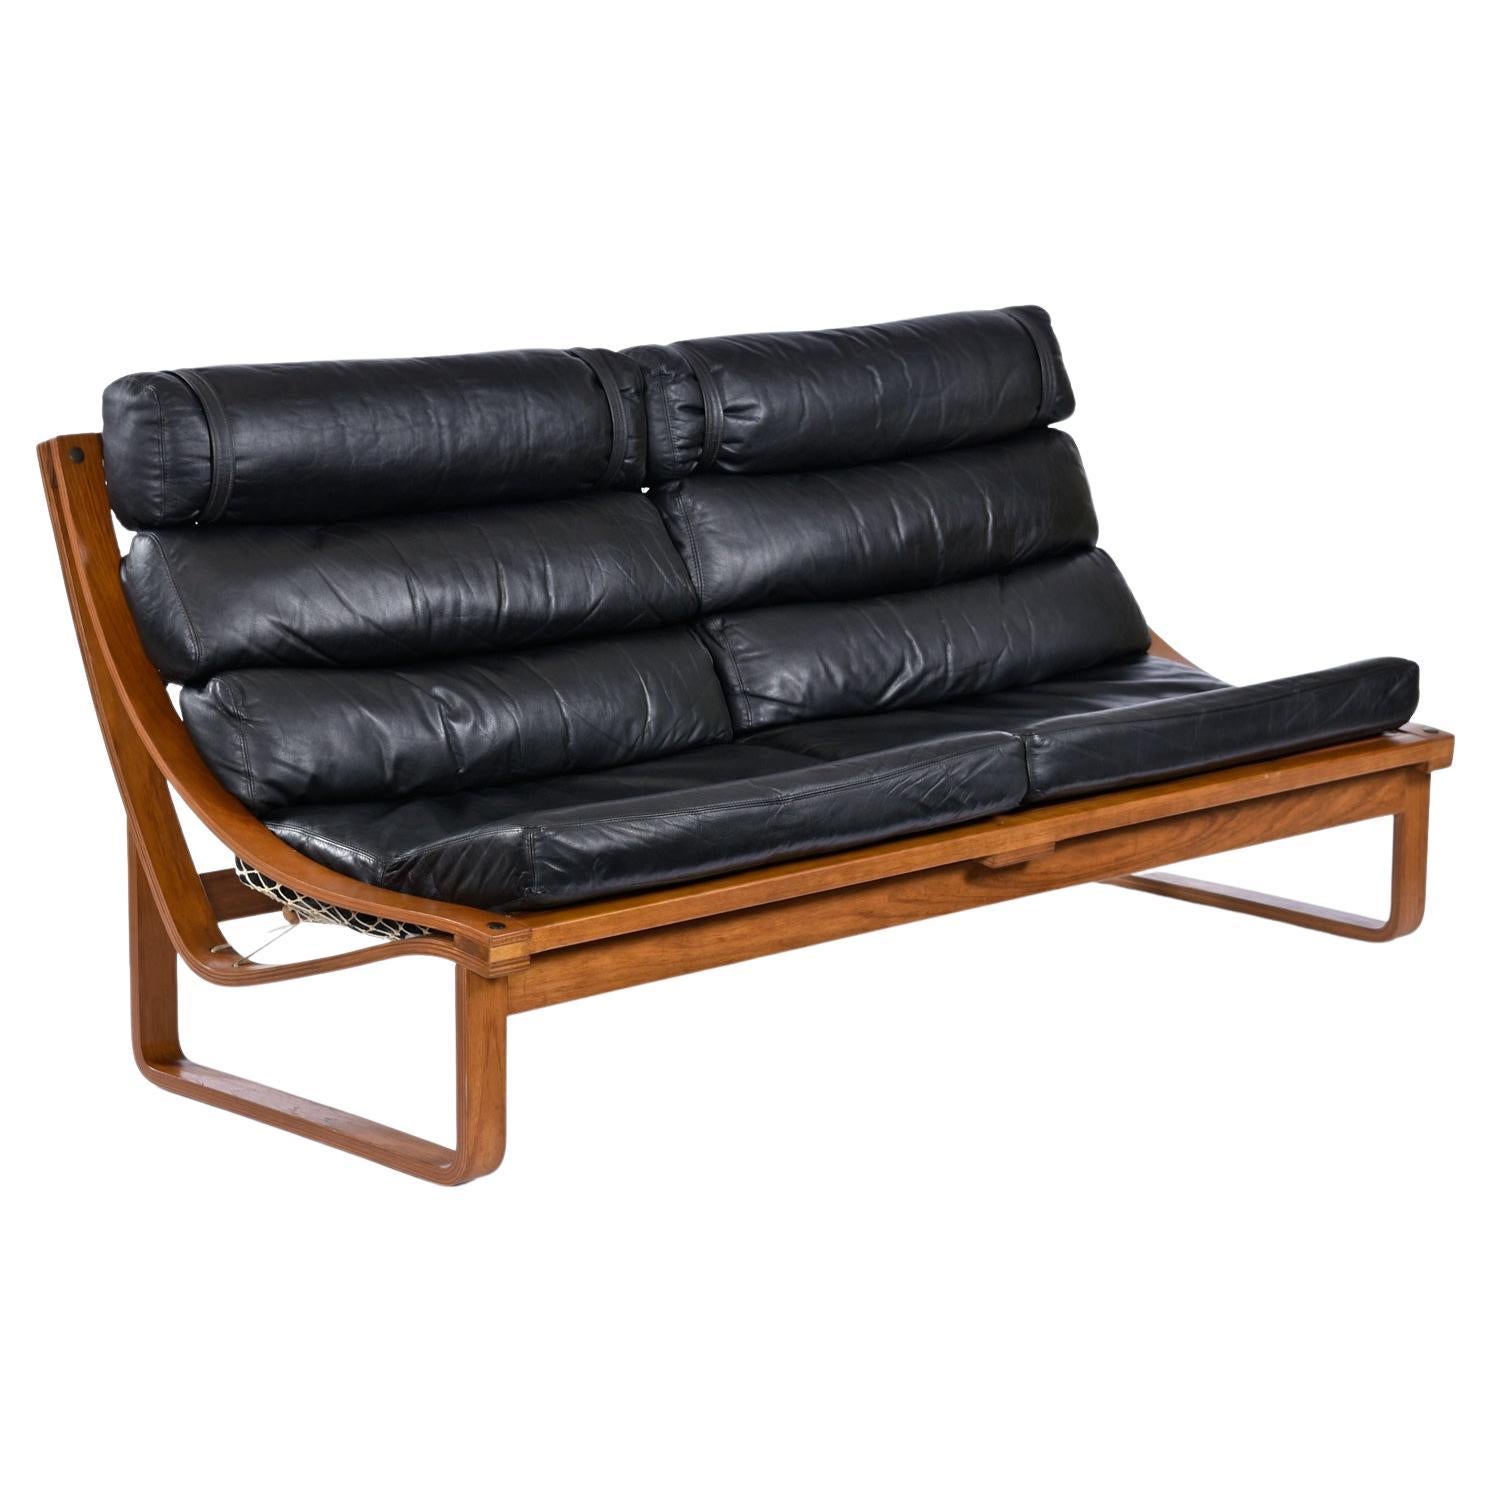 Low profile meets high comfort without compromise with this T4 Sofa. This particular piece is an early 70s release, and is designed by Fred Lowen for Tessa Furniture. Curved, bent-ply teak rails are the ideal frame to suspend the gorgeous leather